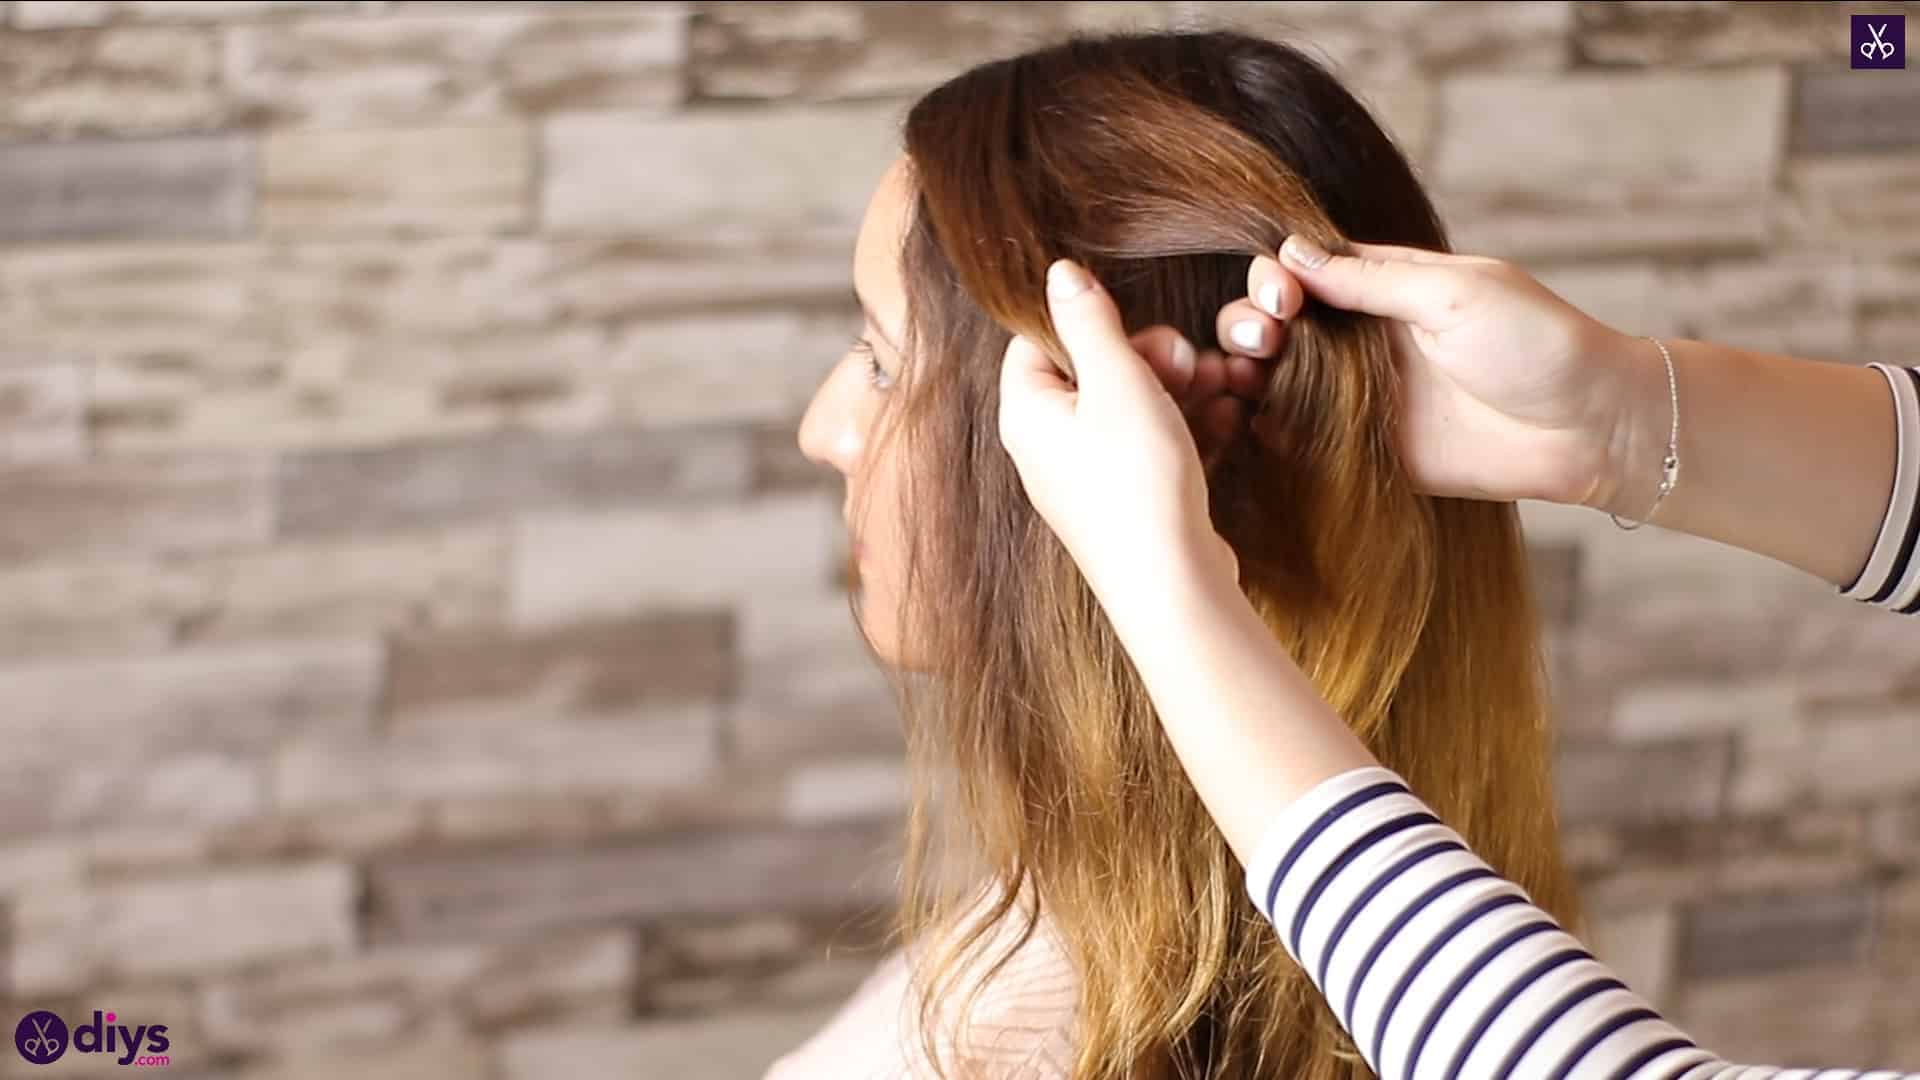 Half up, half down hairstyle for spring8